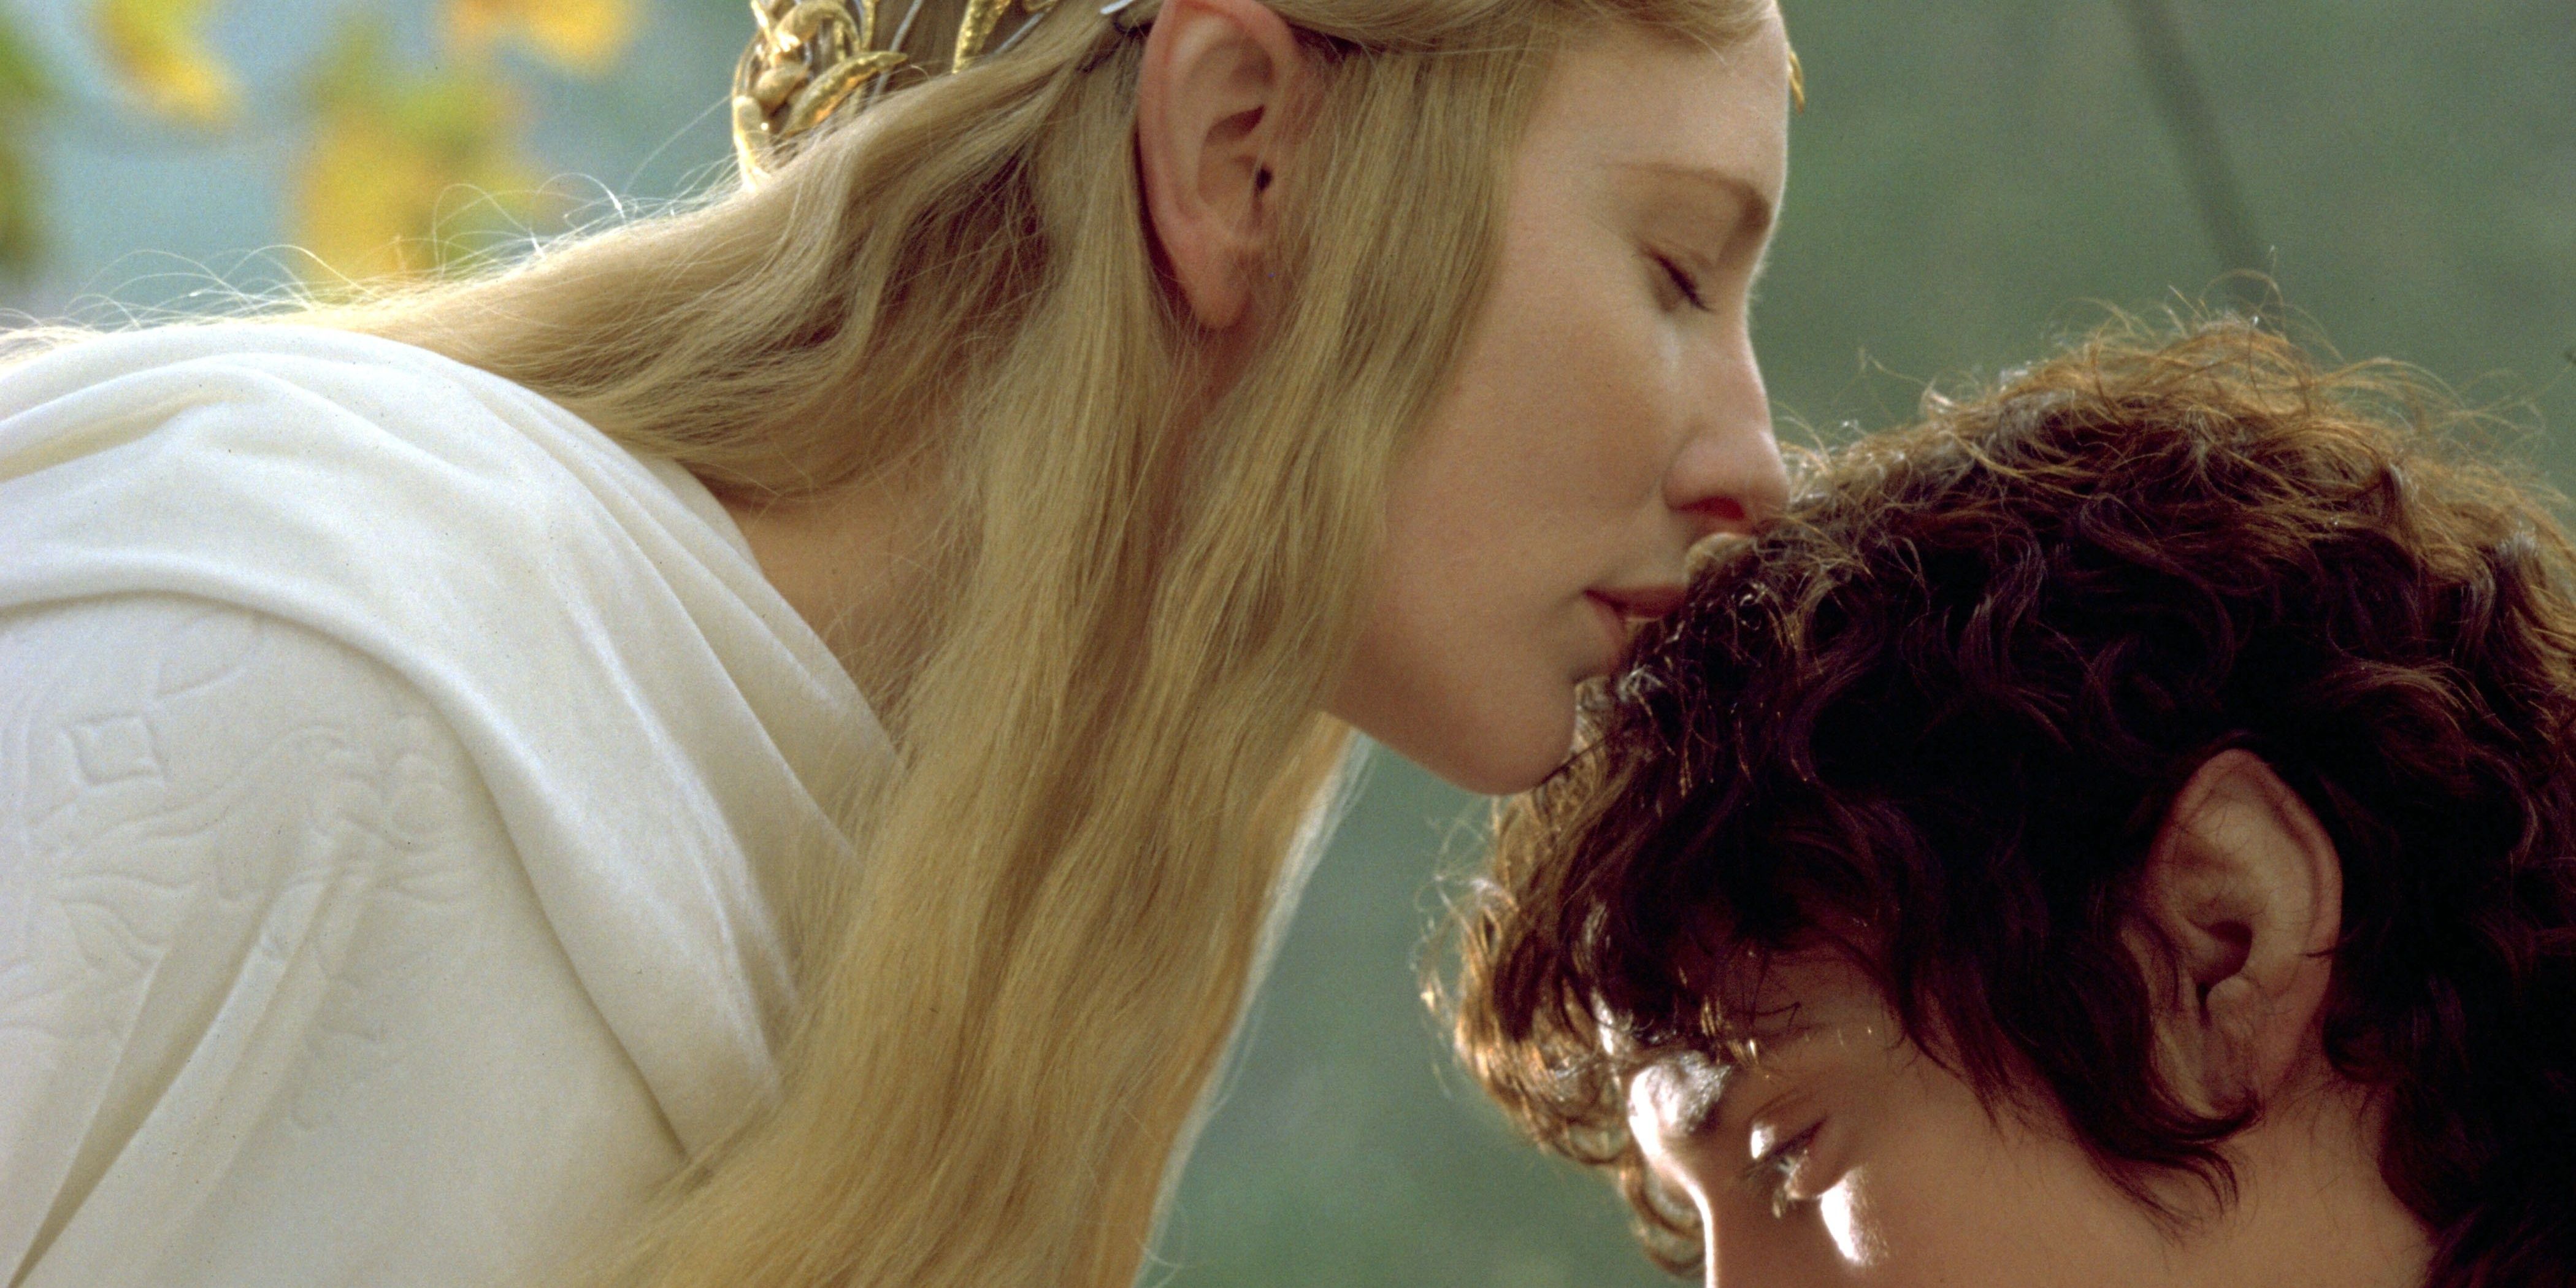 Galadriel kisses Frodo on the forehead